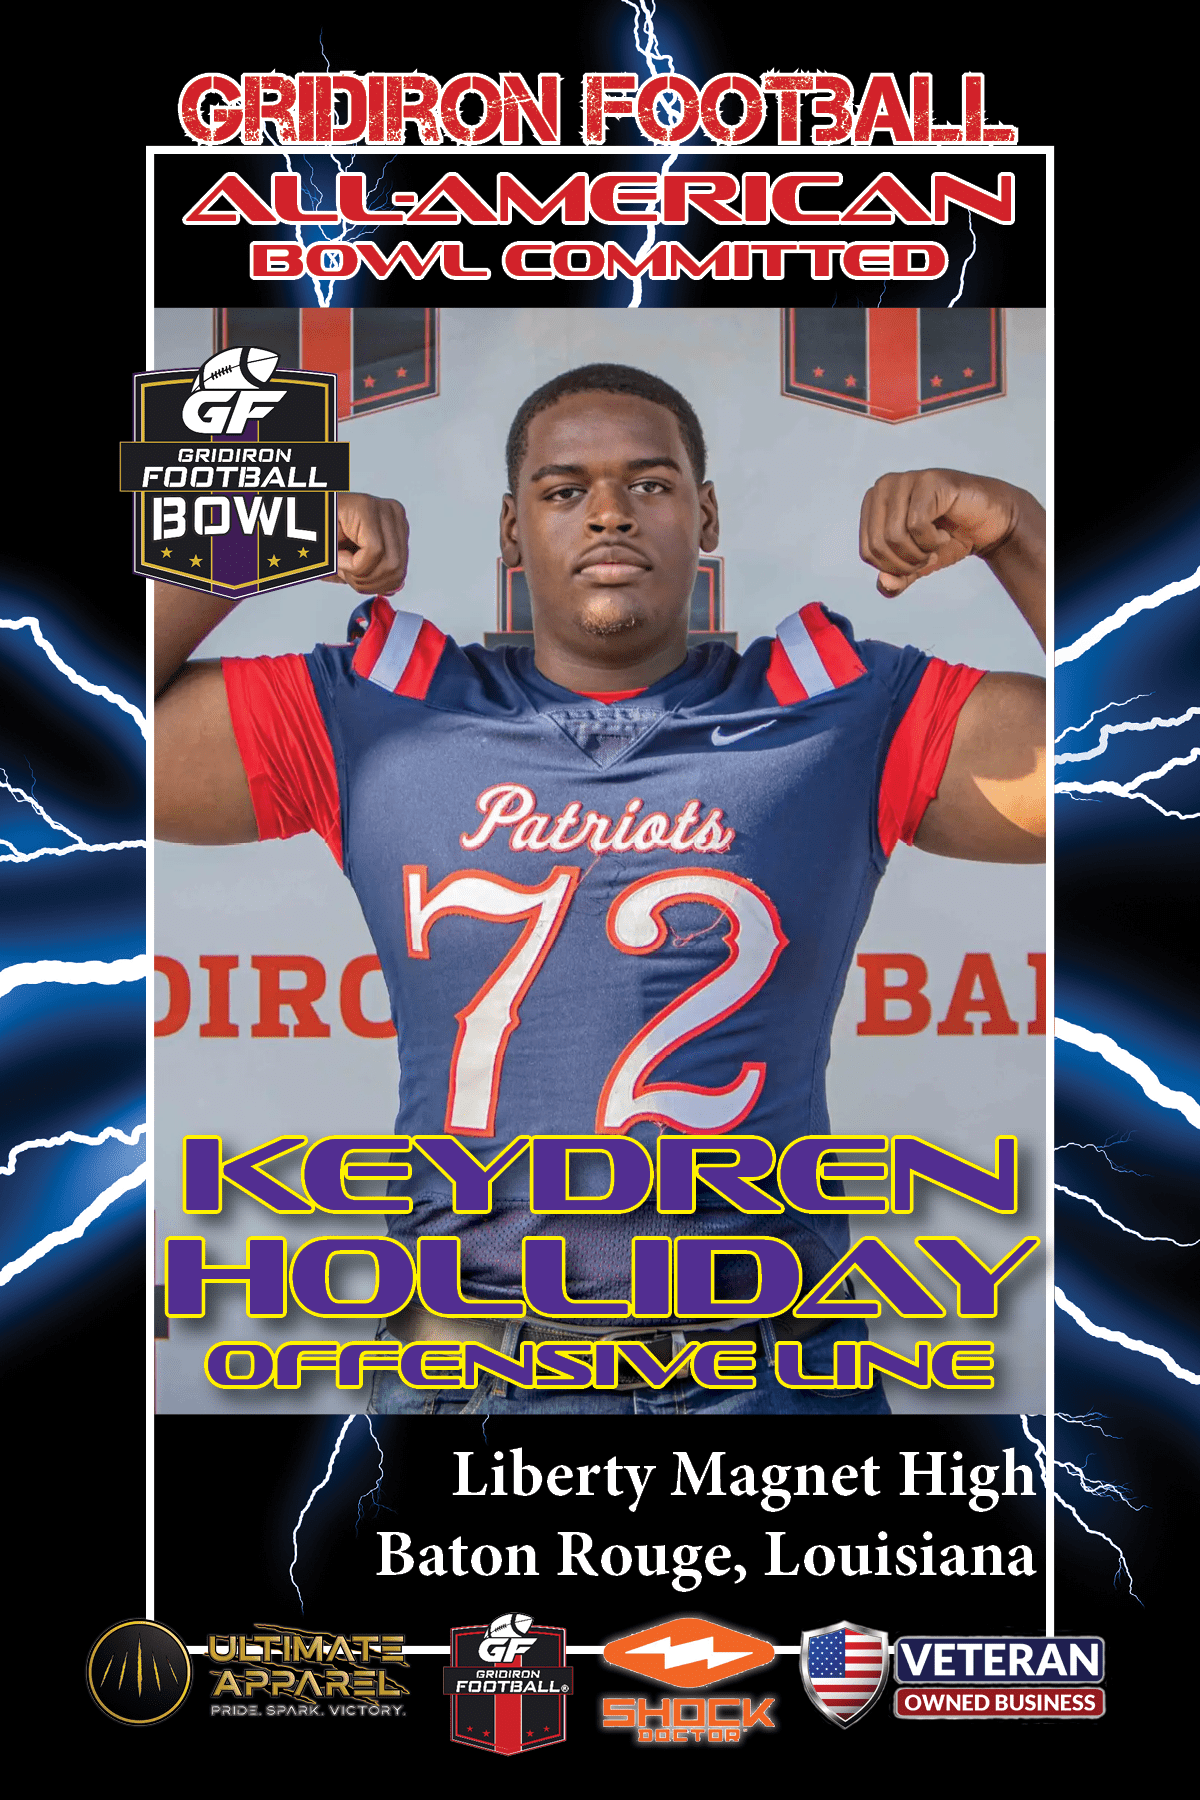 BREAKING NEWS: Liberty Magnet High School (Baton Rouge, LA) OL Keydren Holliday Commits To The Gridiron Football All-American Bowl Game